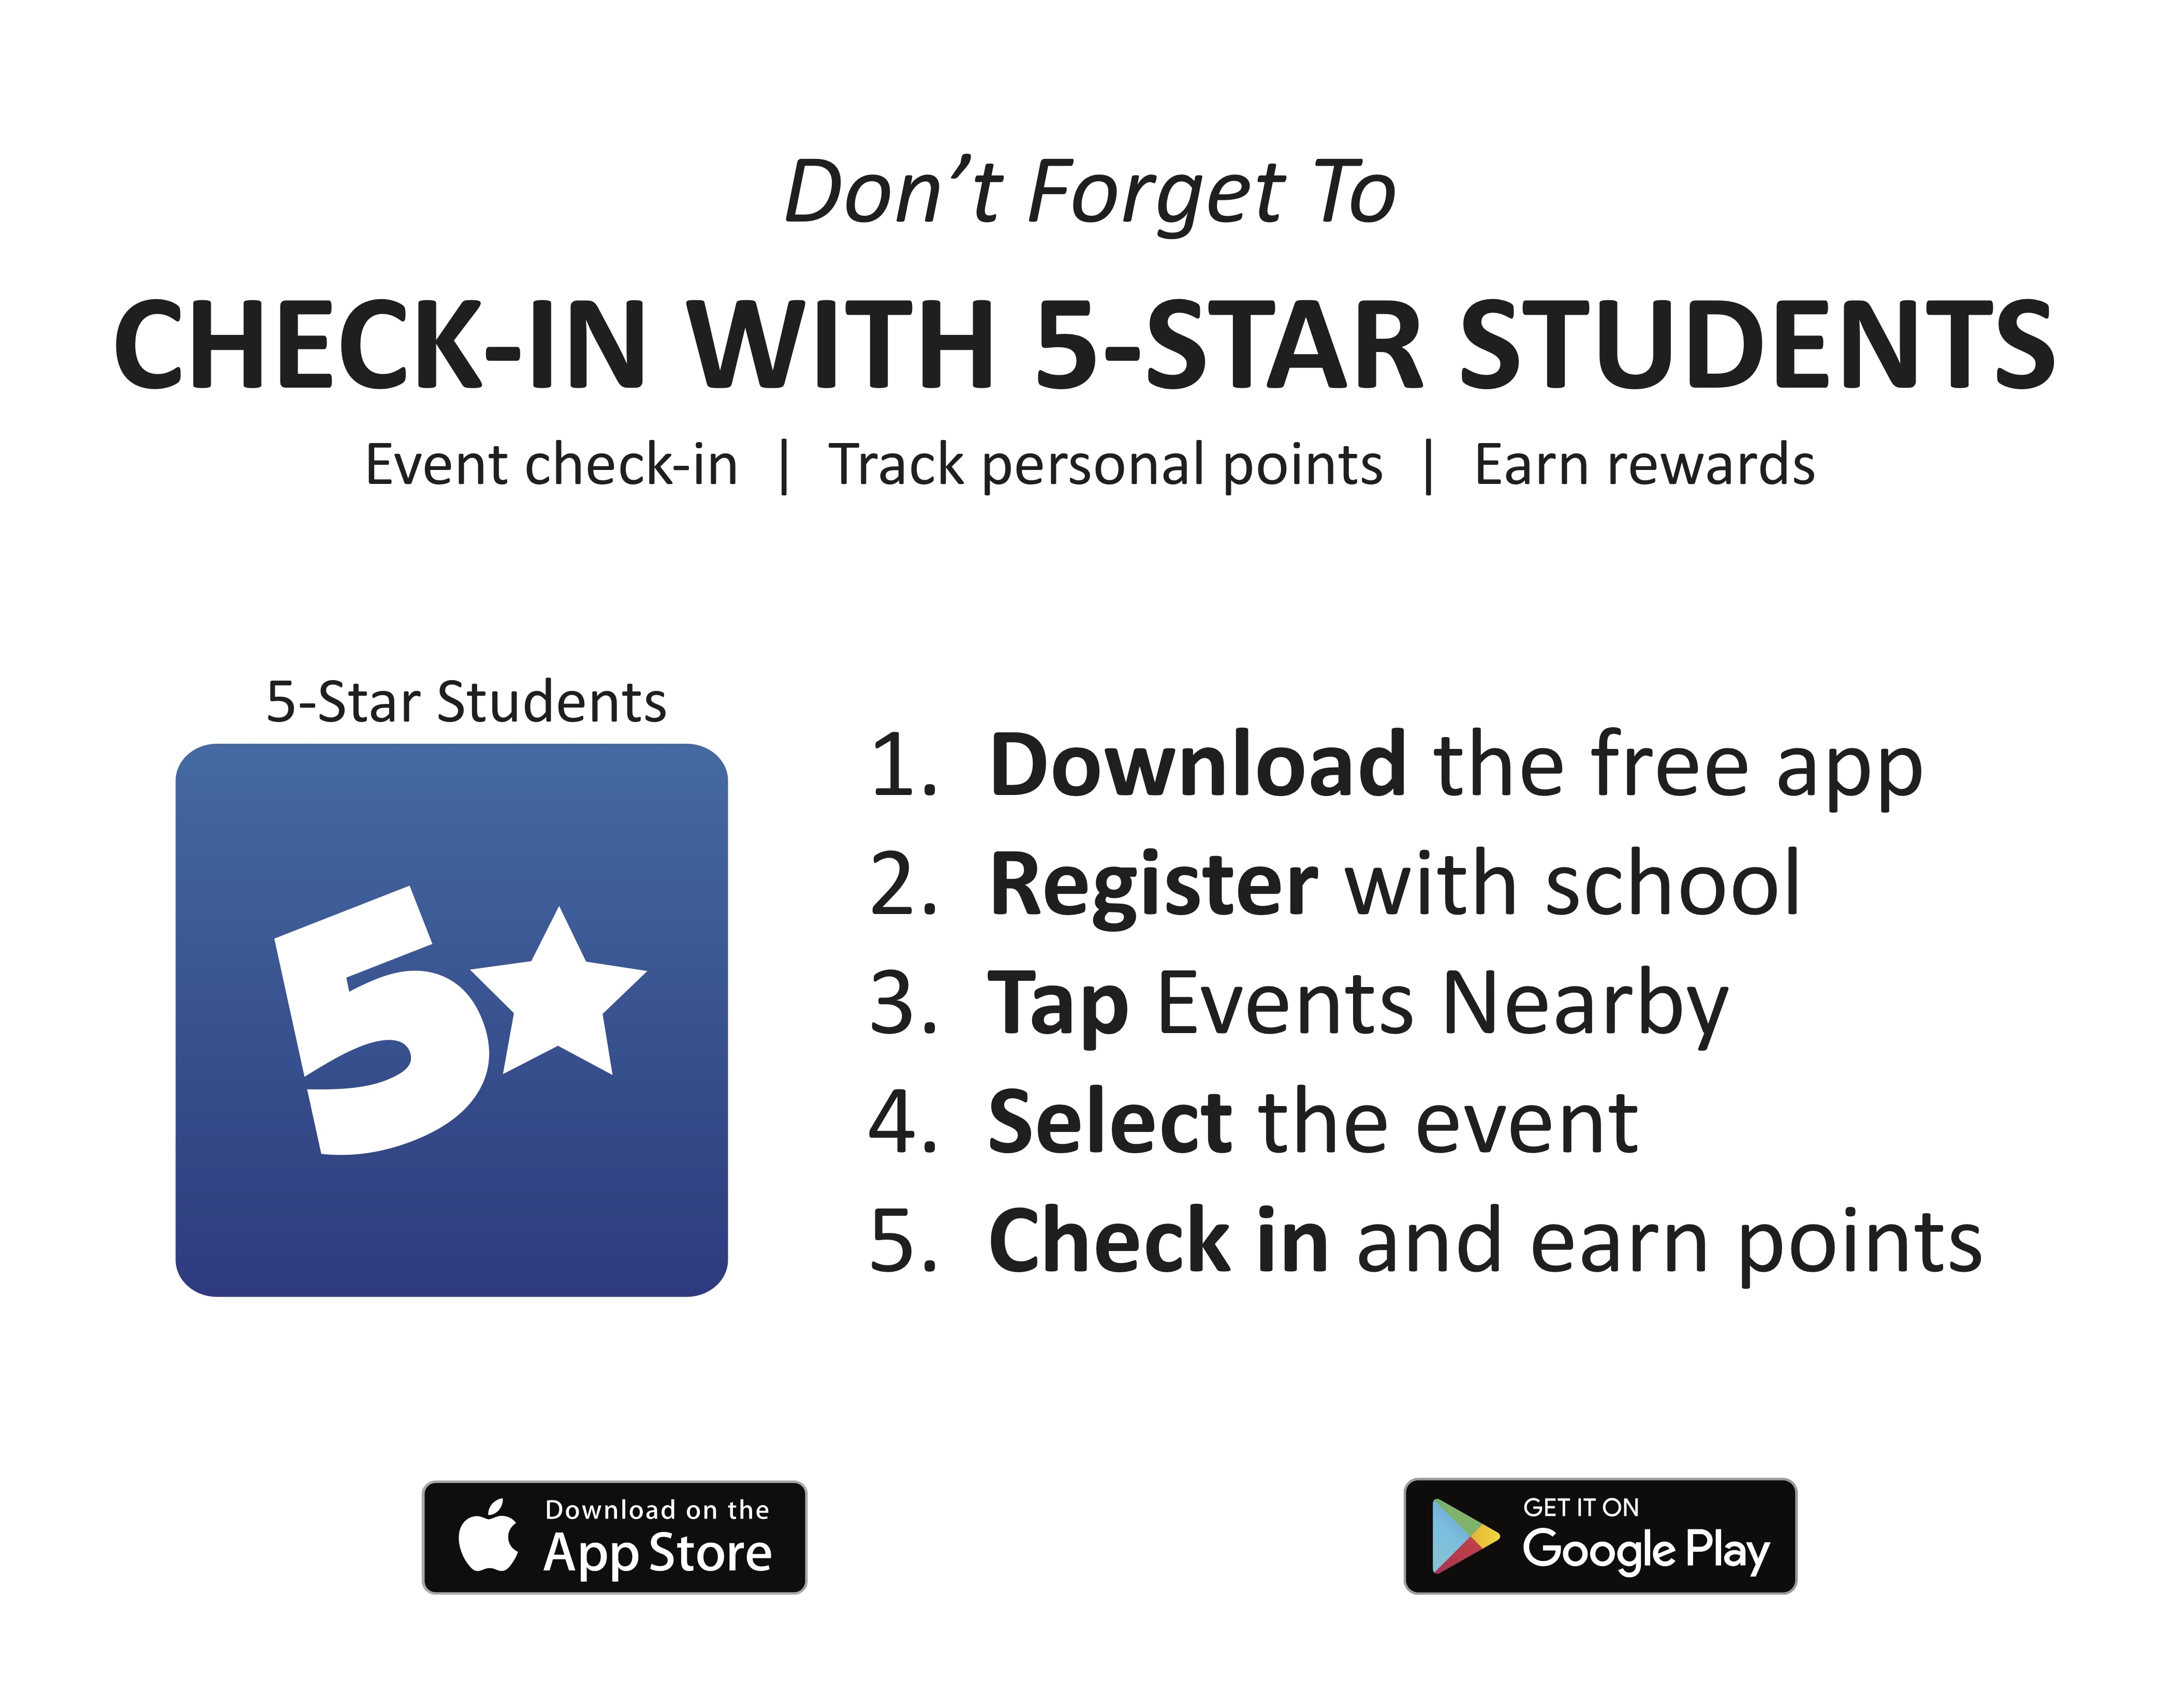 Instructions for how to download the app